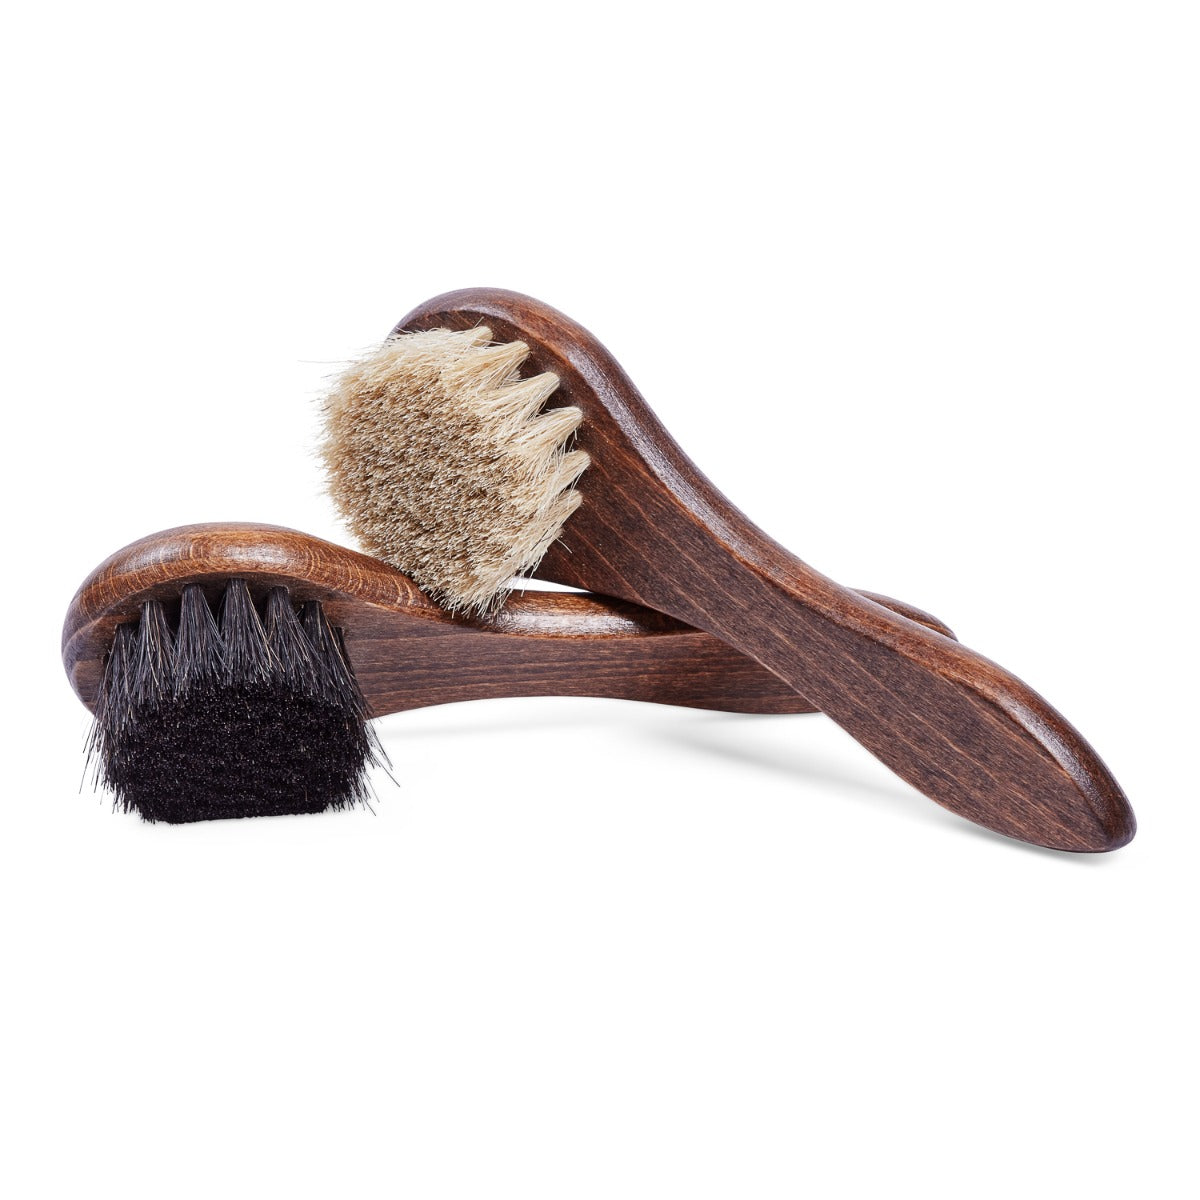 Two wooden brushes, including an Extra-Large Shoe Cleaning Dauber from KirbyAllison.com, on a white background.